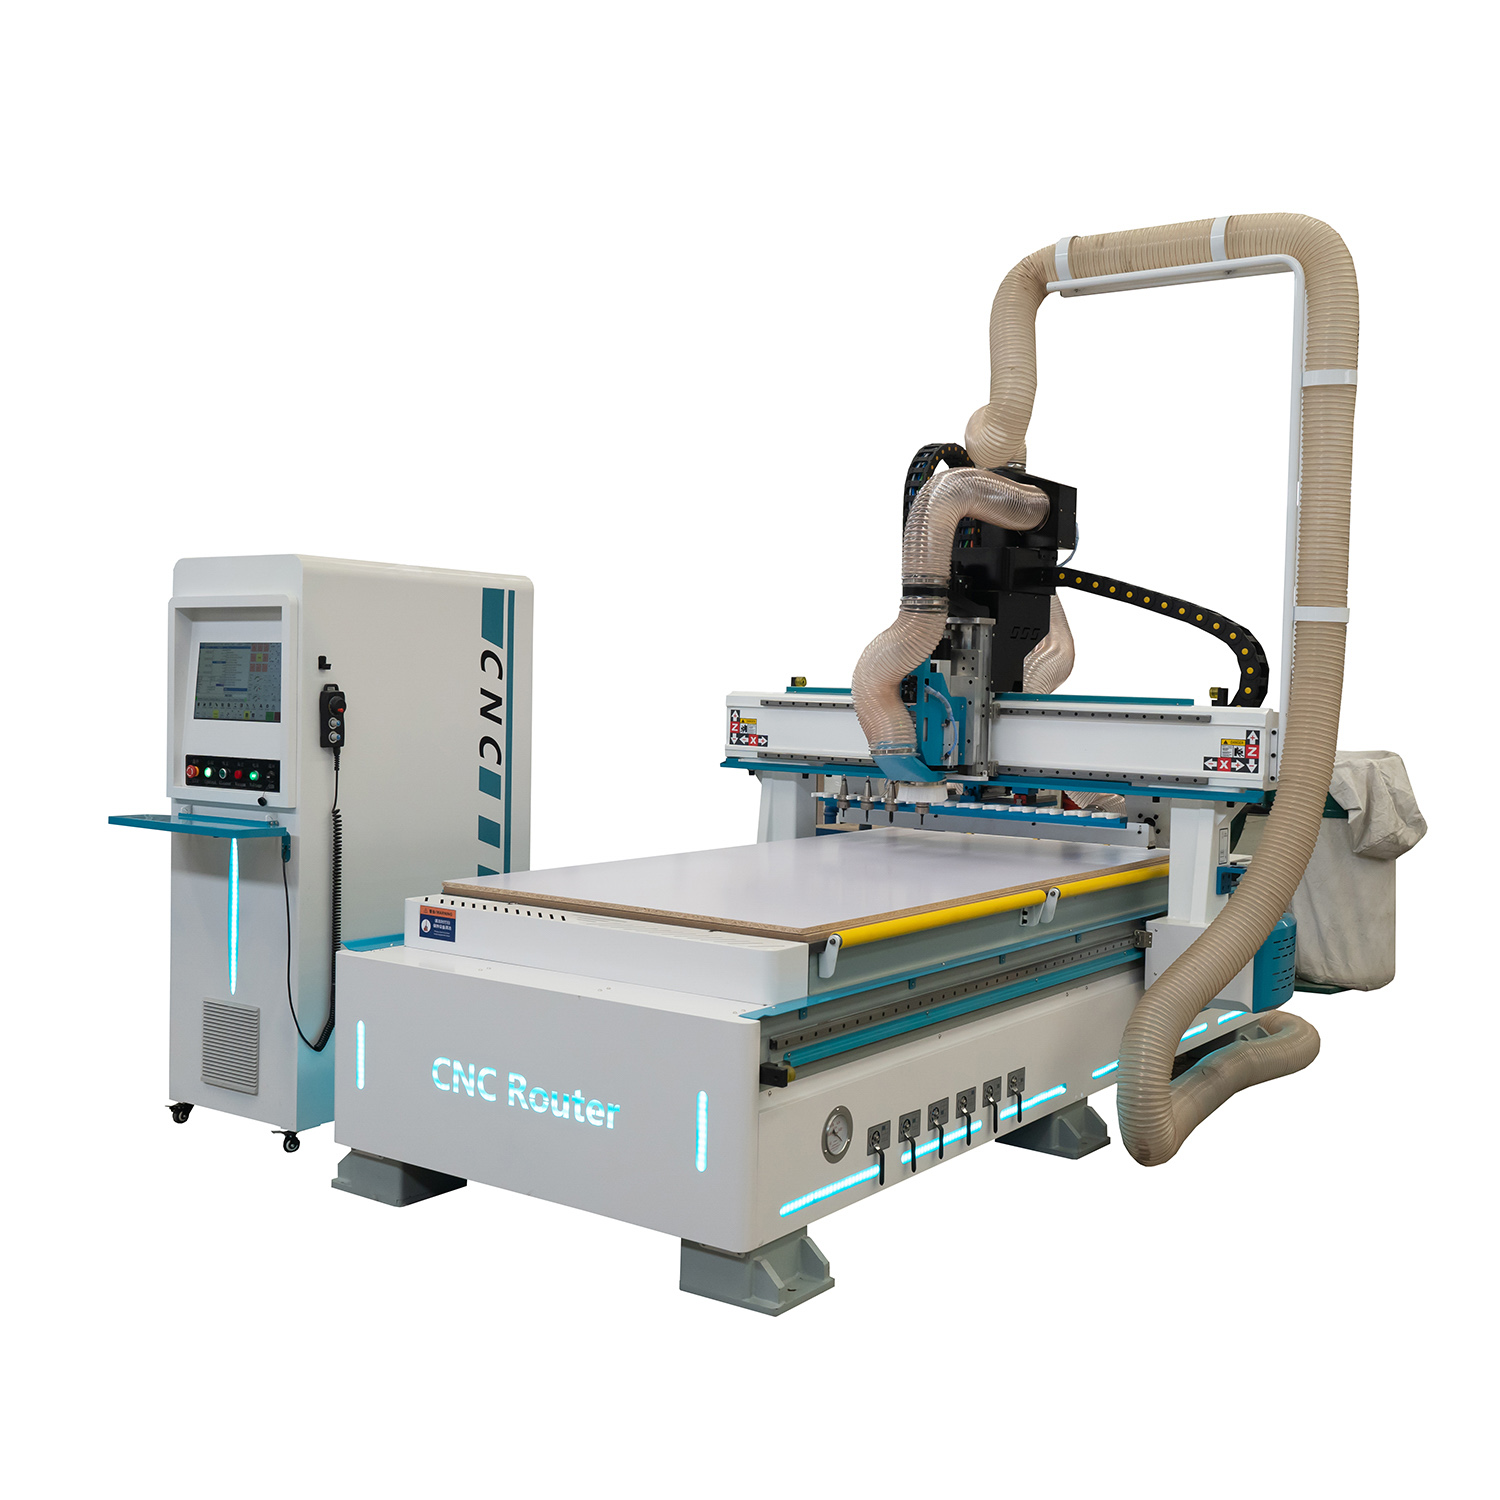 2019 China New Design China 4 Axis Engraving/Cutting/Drilling/Milling Wood Acrylic MDF 1325 Atc Italy Spindle CNC Router Price with Rotating Spindle Featured Image